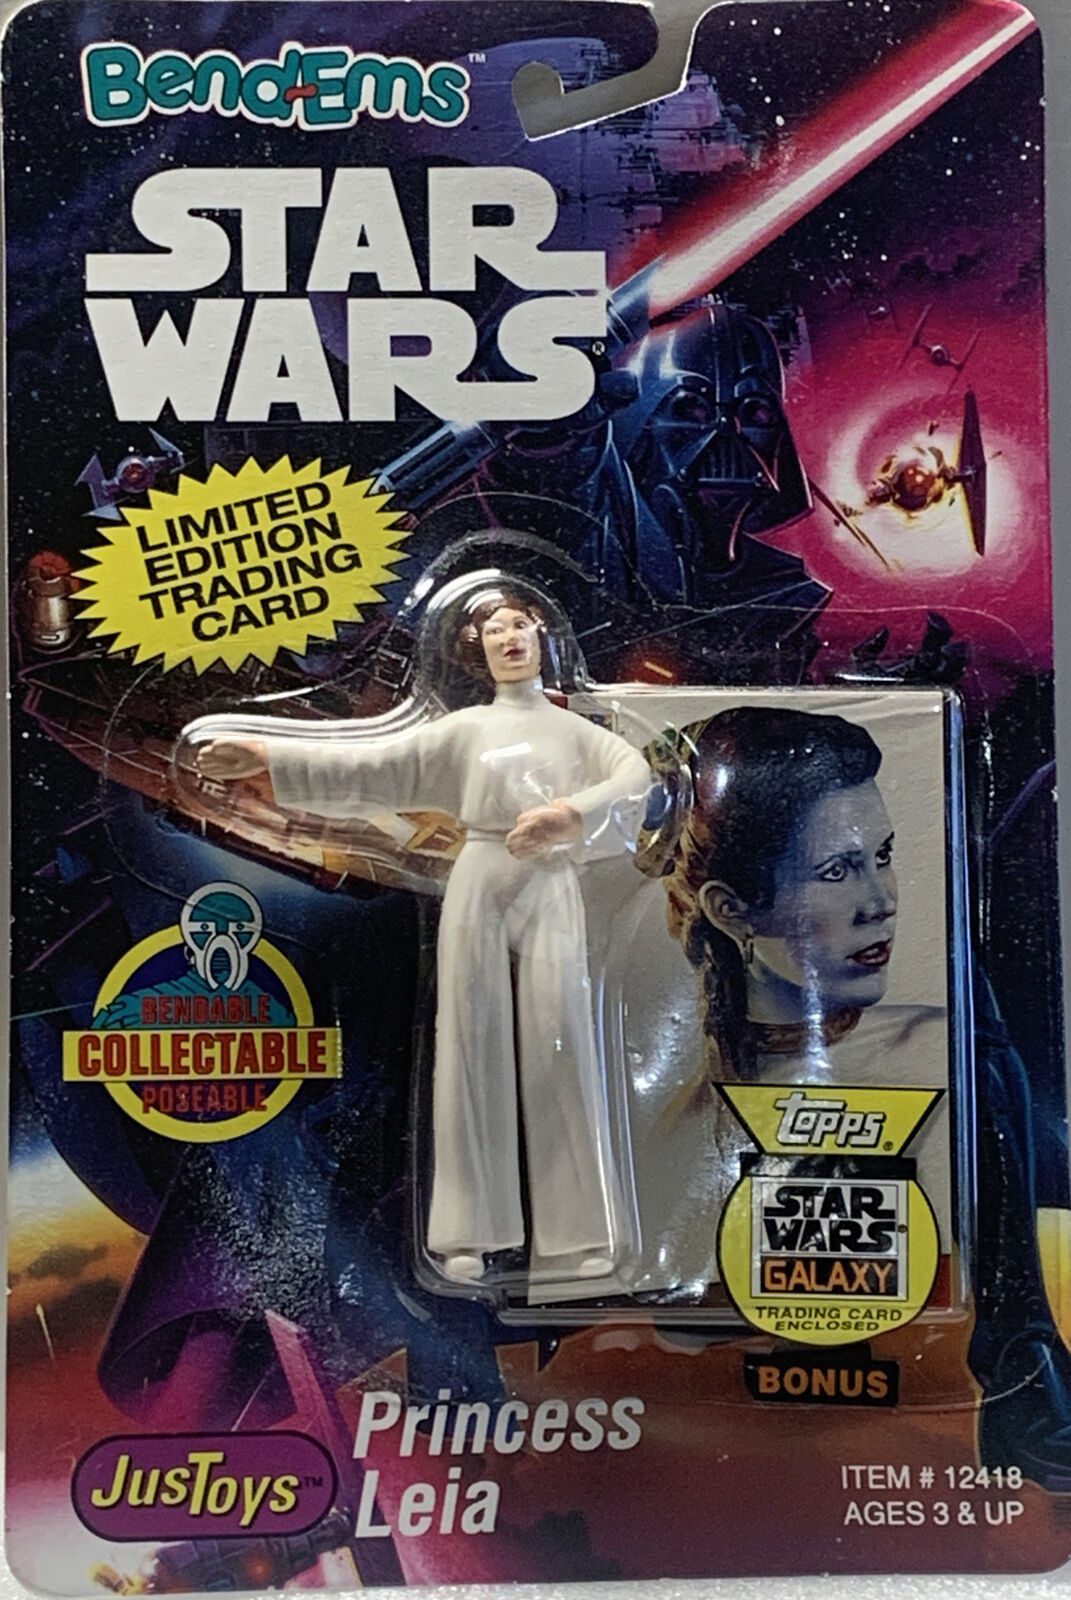 Star Wars Princess Leia! 1993 Bend-Ems JusToys With Topps Card Great Collectible